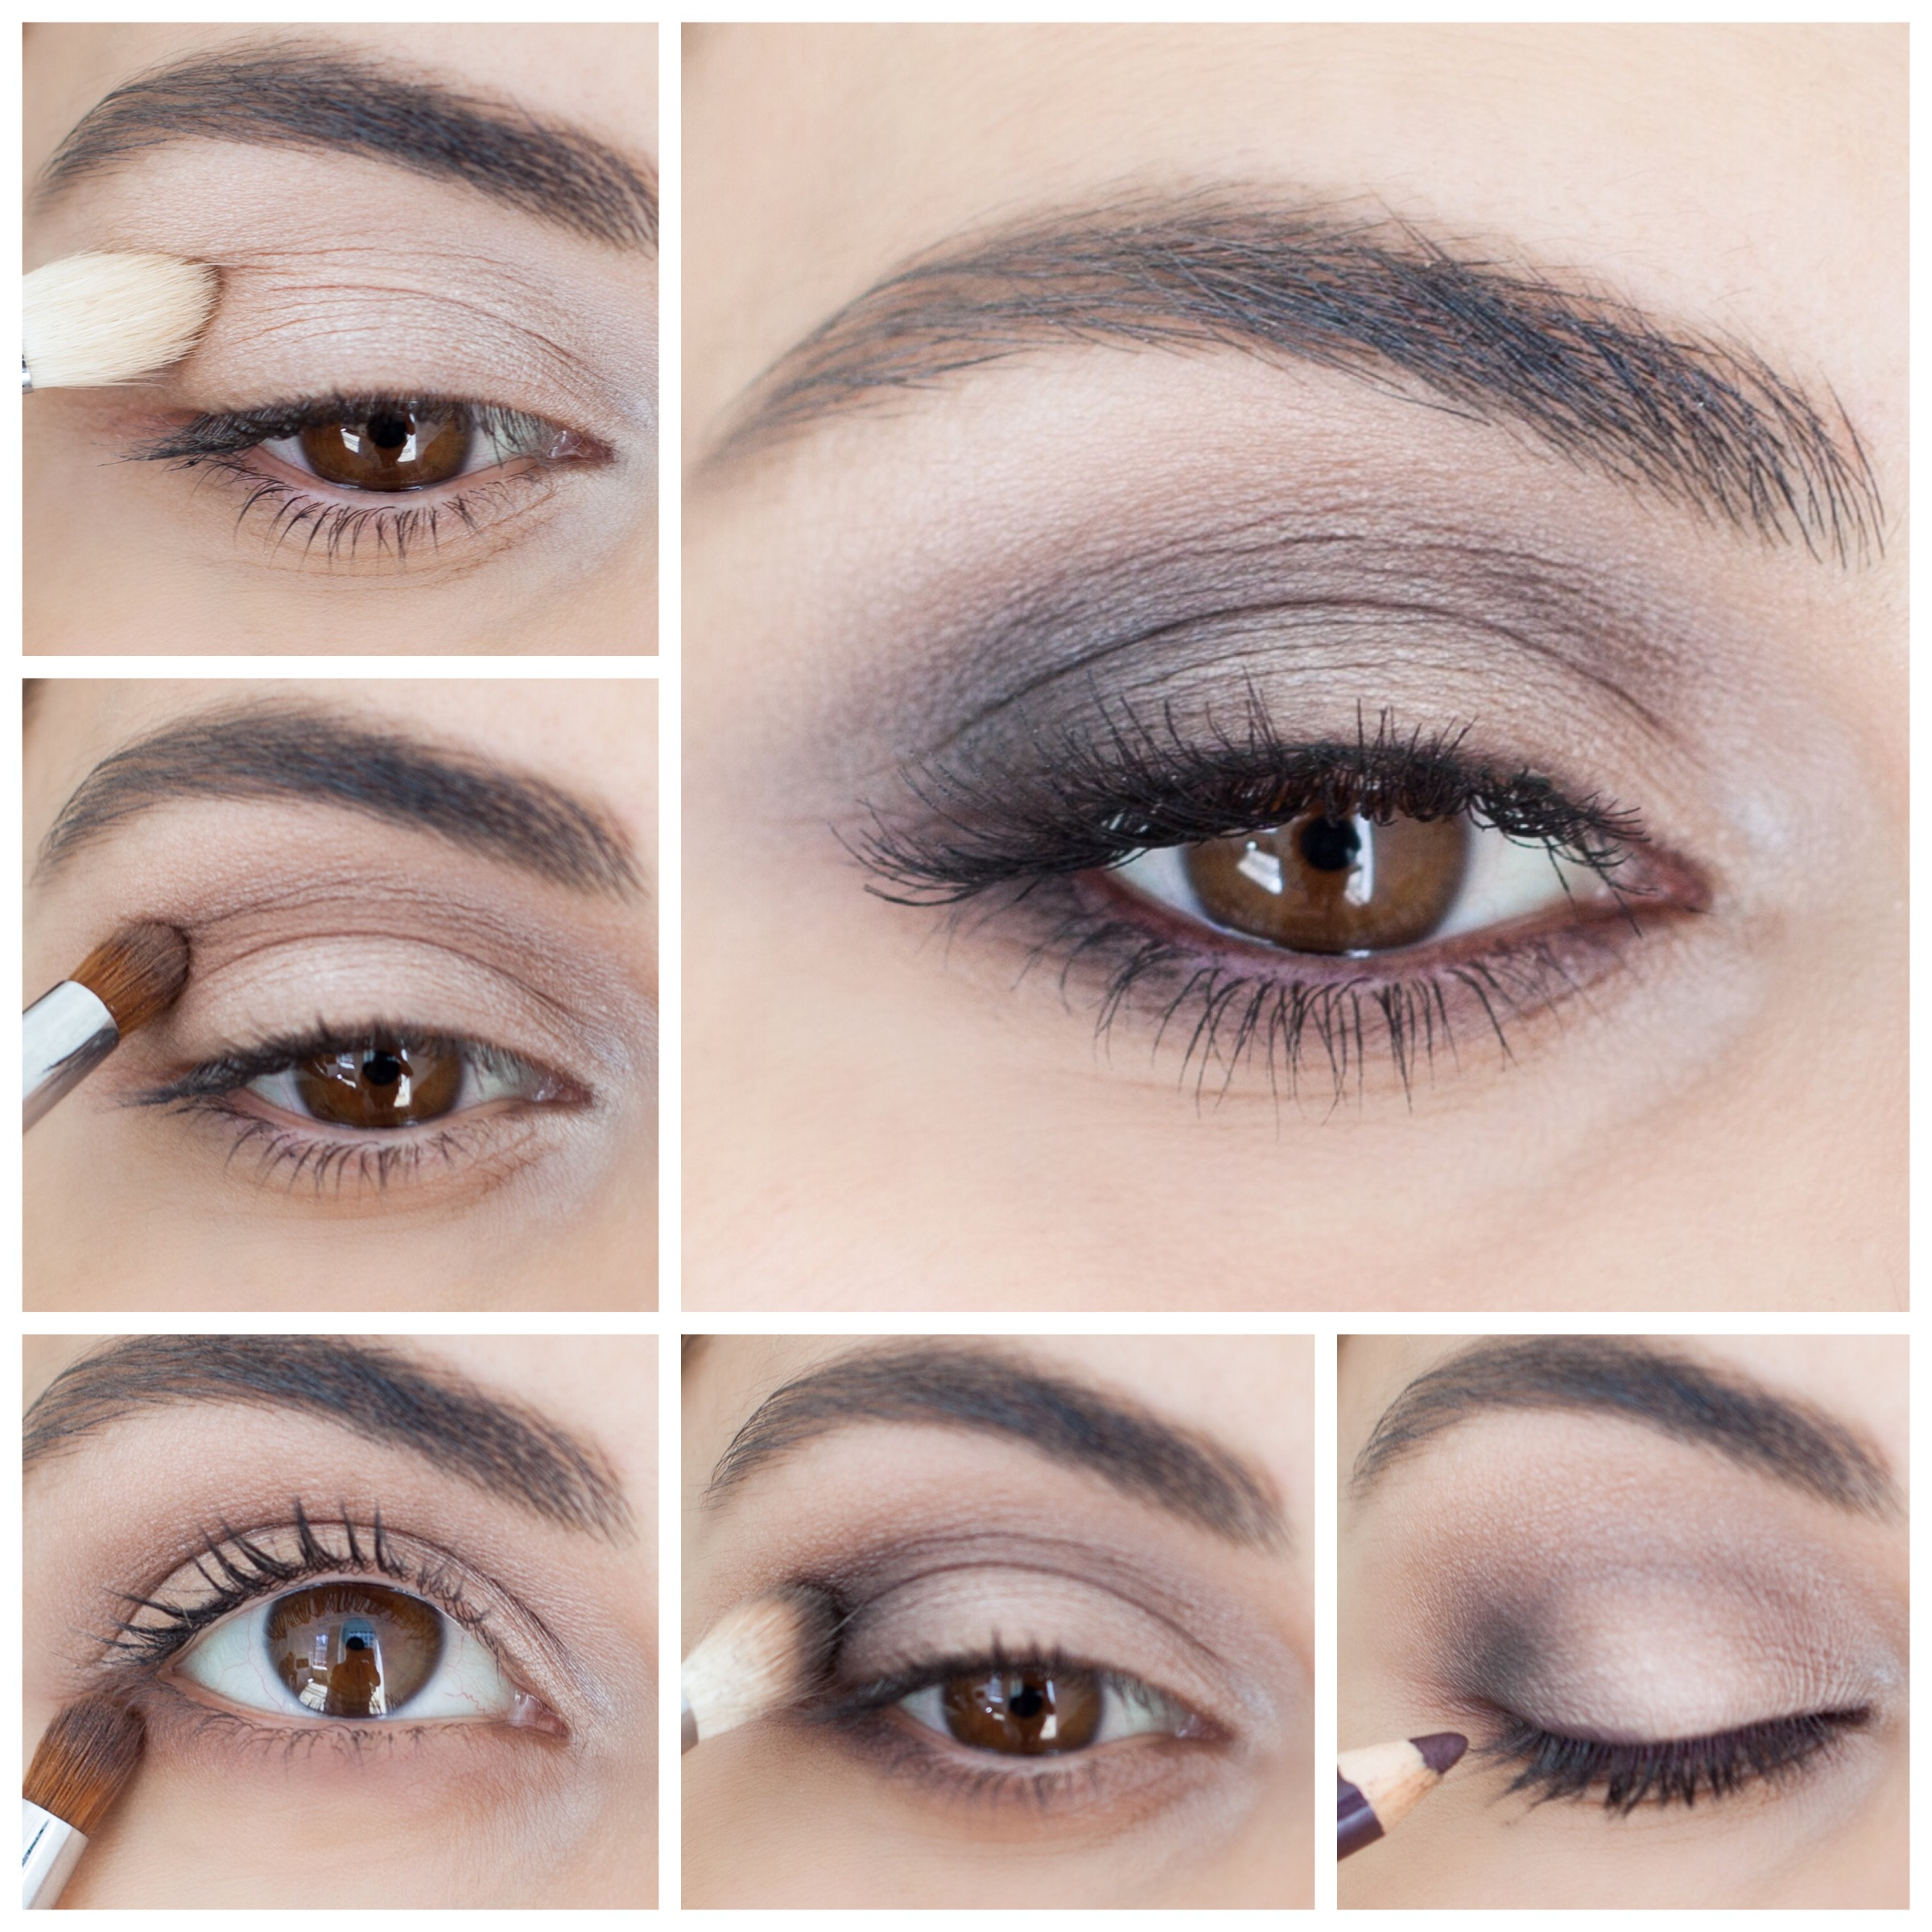 Best Smokey Eye Makeup For Brown Eyes 40 Hottest Smokey Eye Makeup Ideas 2019 Smokey Eye Tutorials For